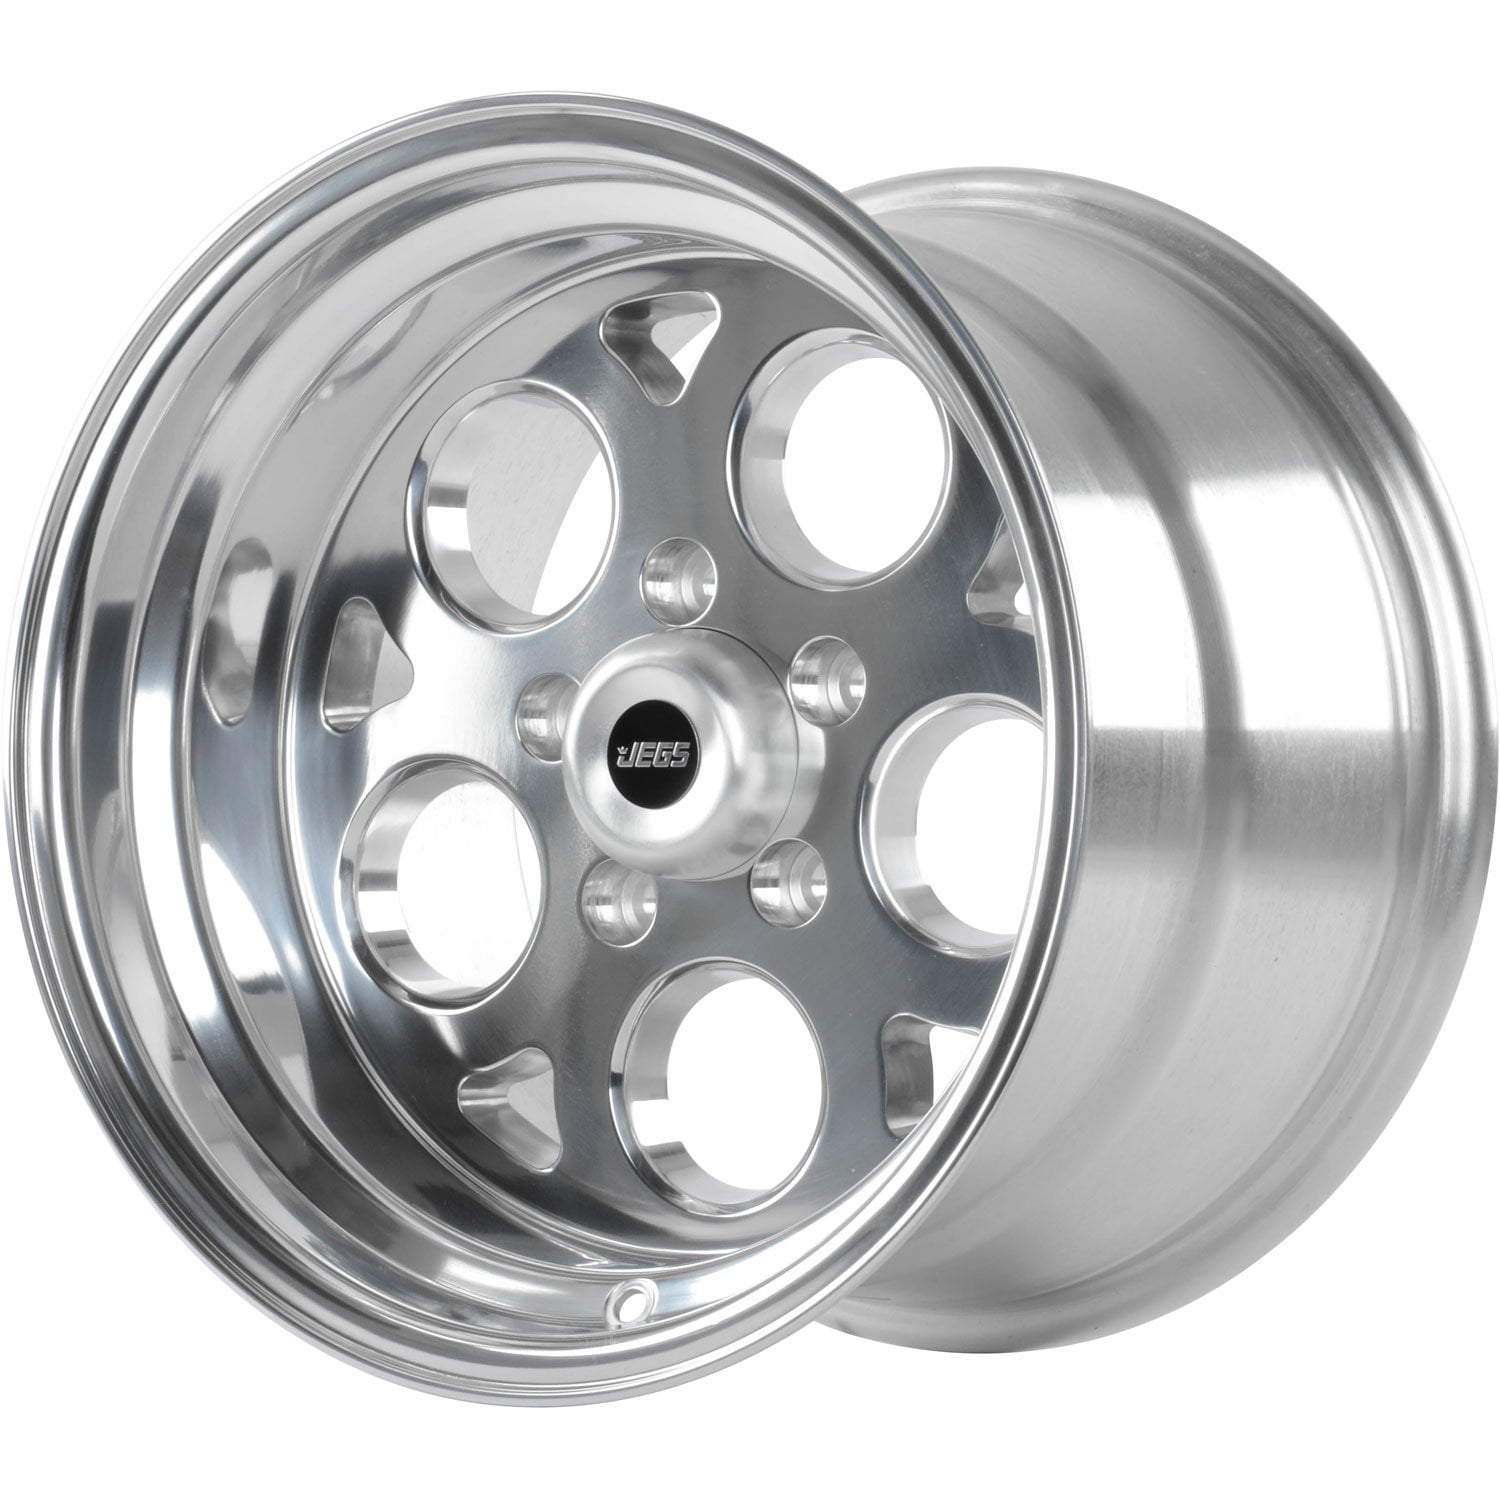 JEGS Performance Products 69039 SSR Mag Wheel Diameter & Width 15 x 10